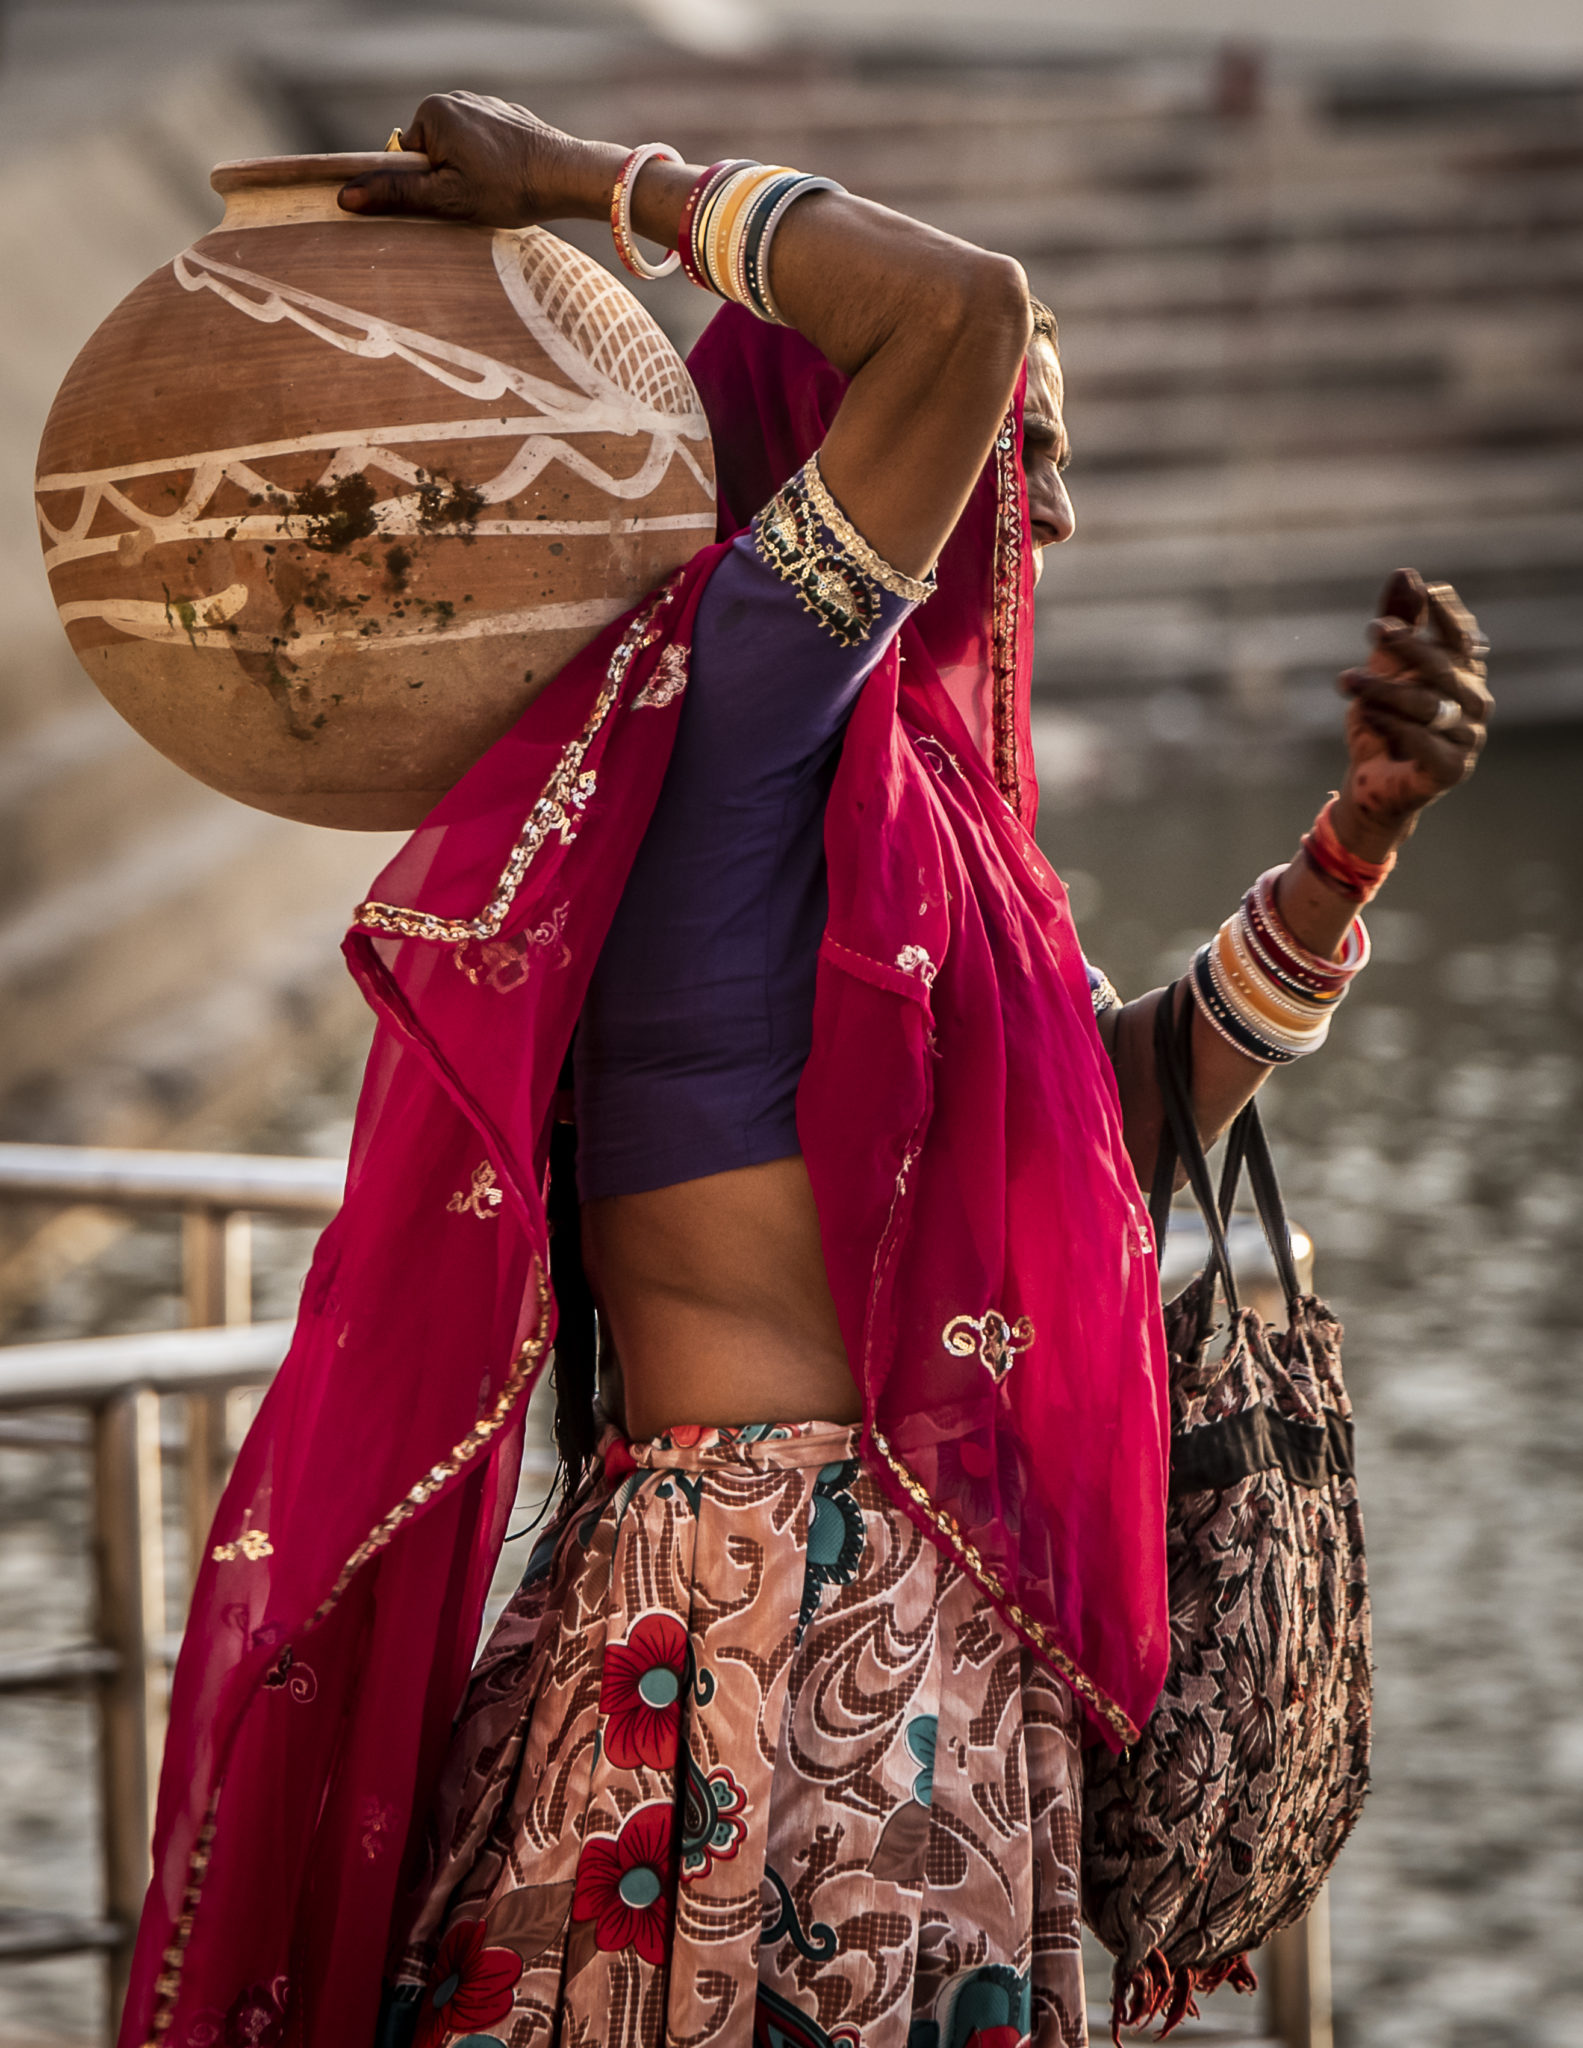 Woman of – India